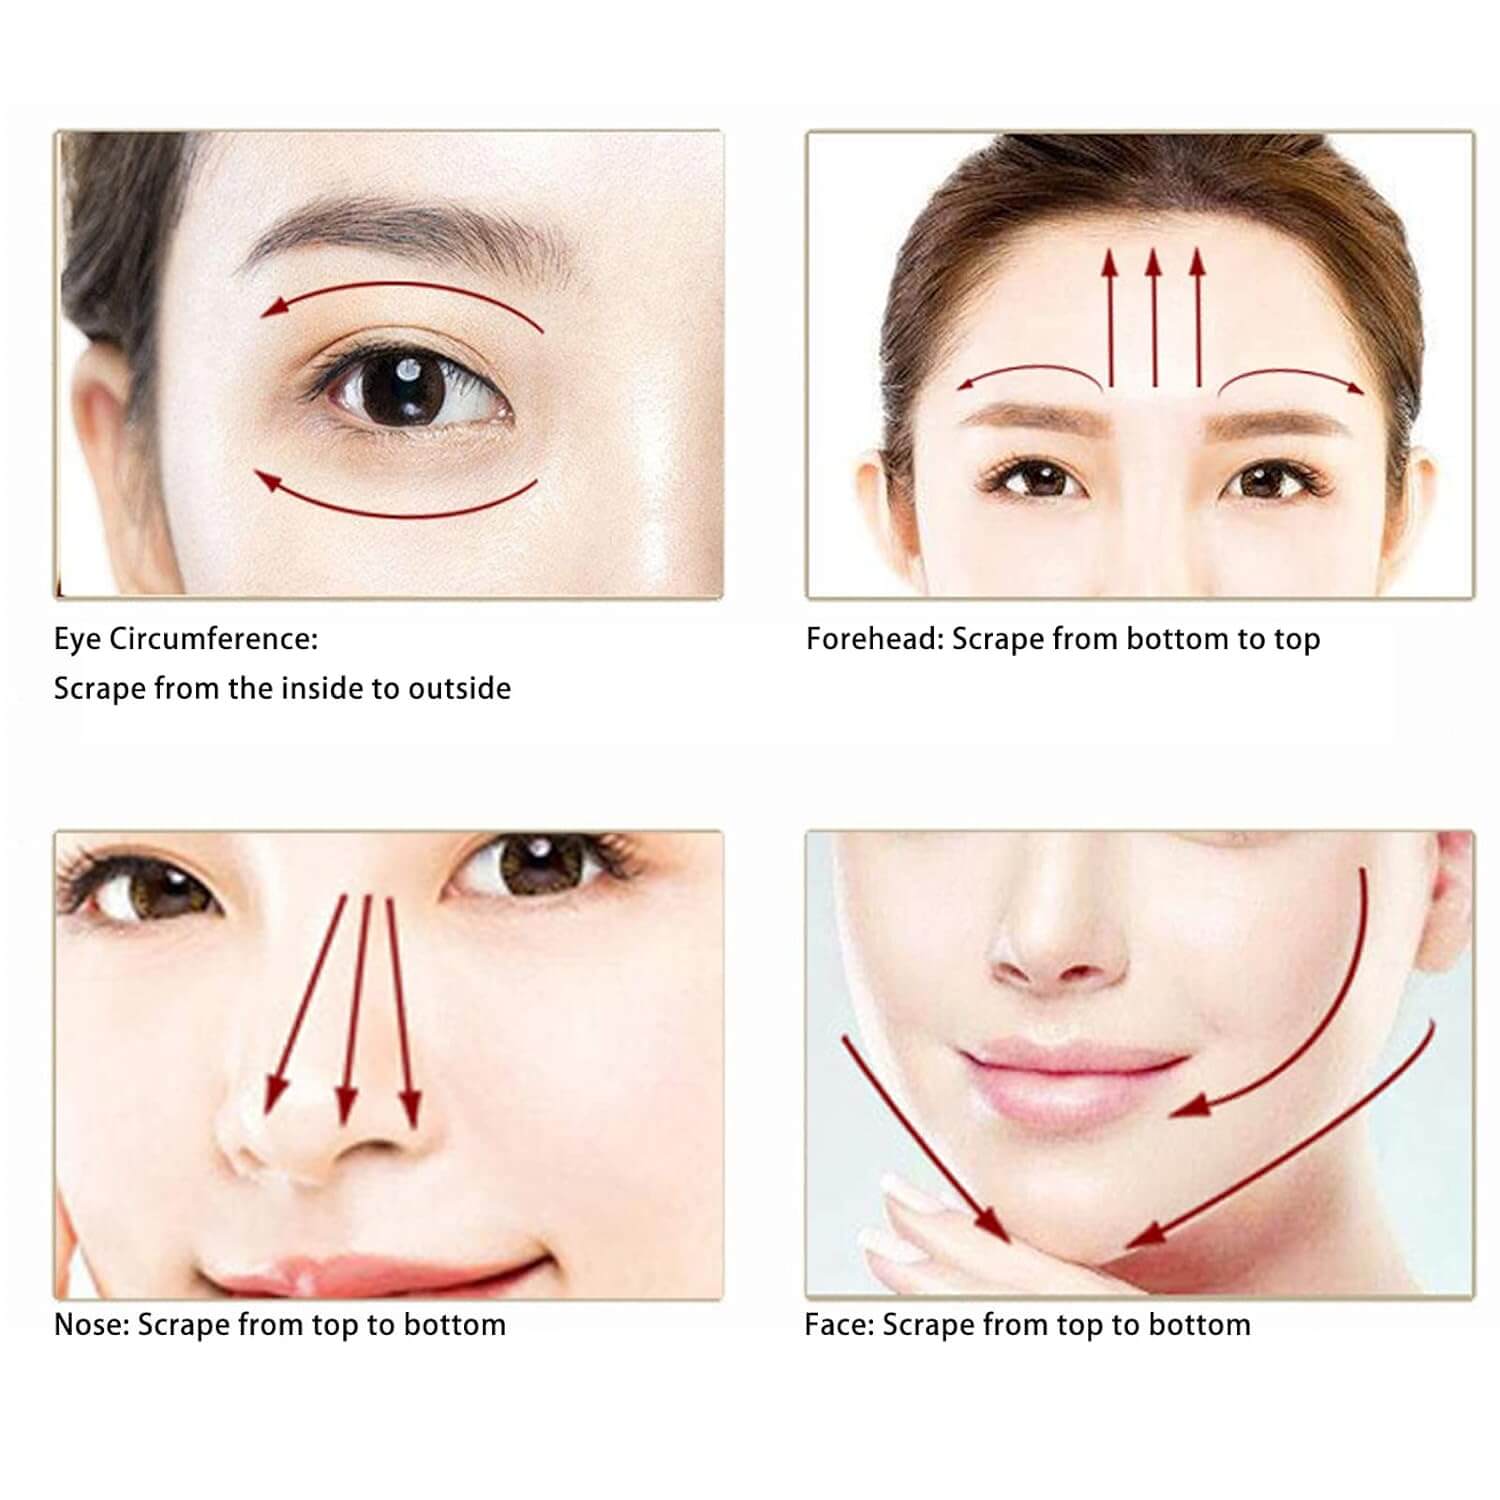 The benifits of the Terahertz Gua Sha tool on a models eye circumference, forehead, nose and face